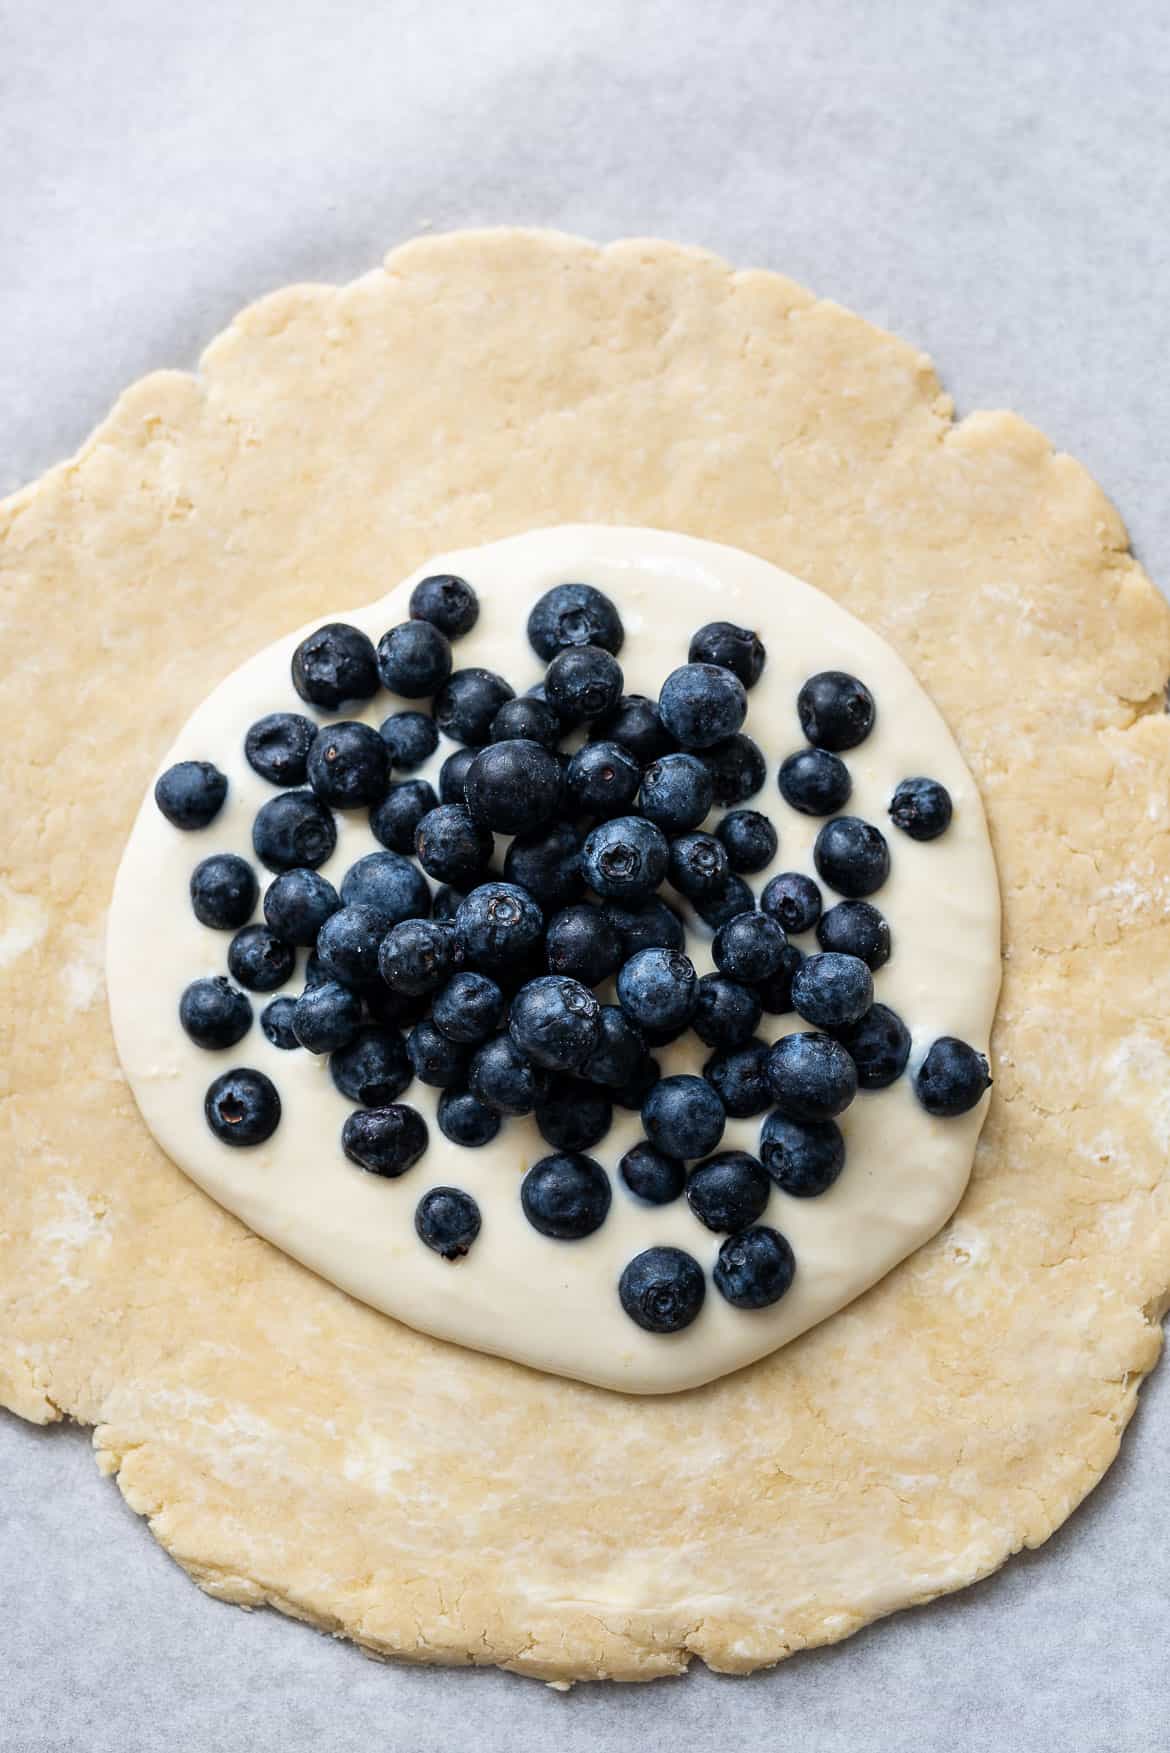 Yogurt cream and blueberry topped pastry dough for a galette.